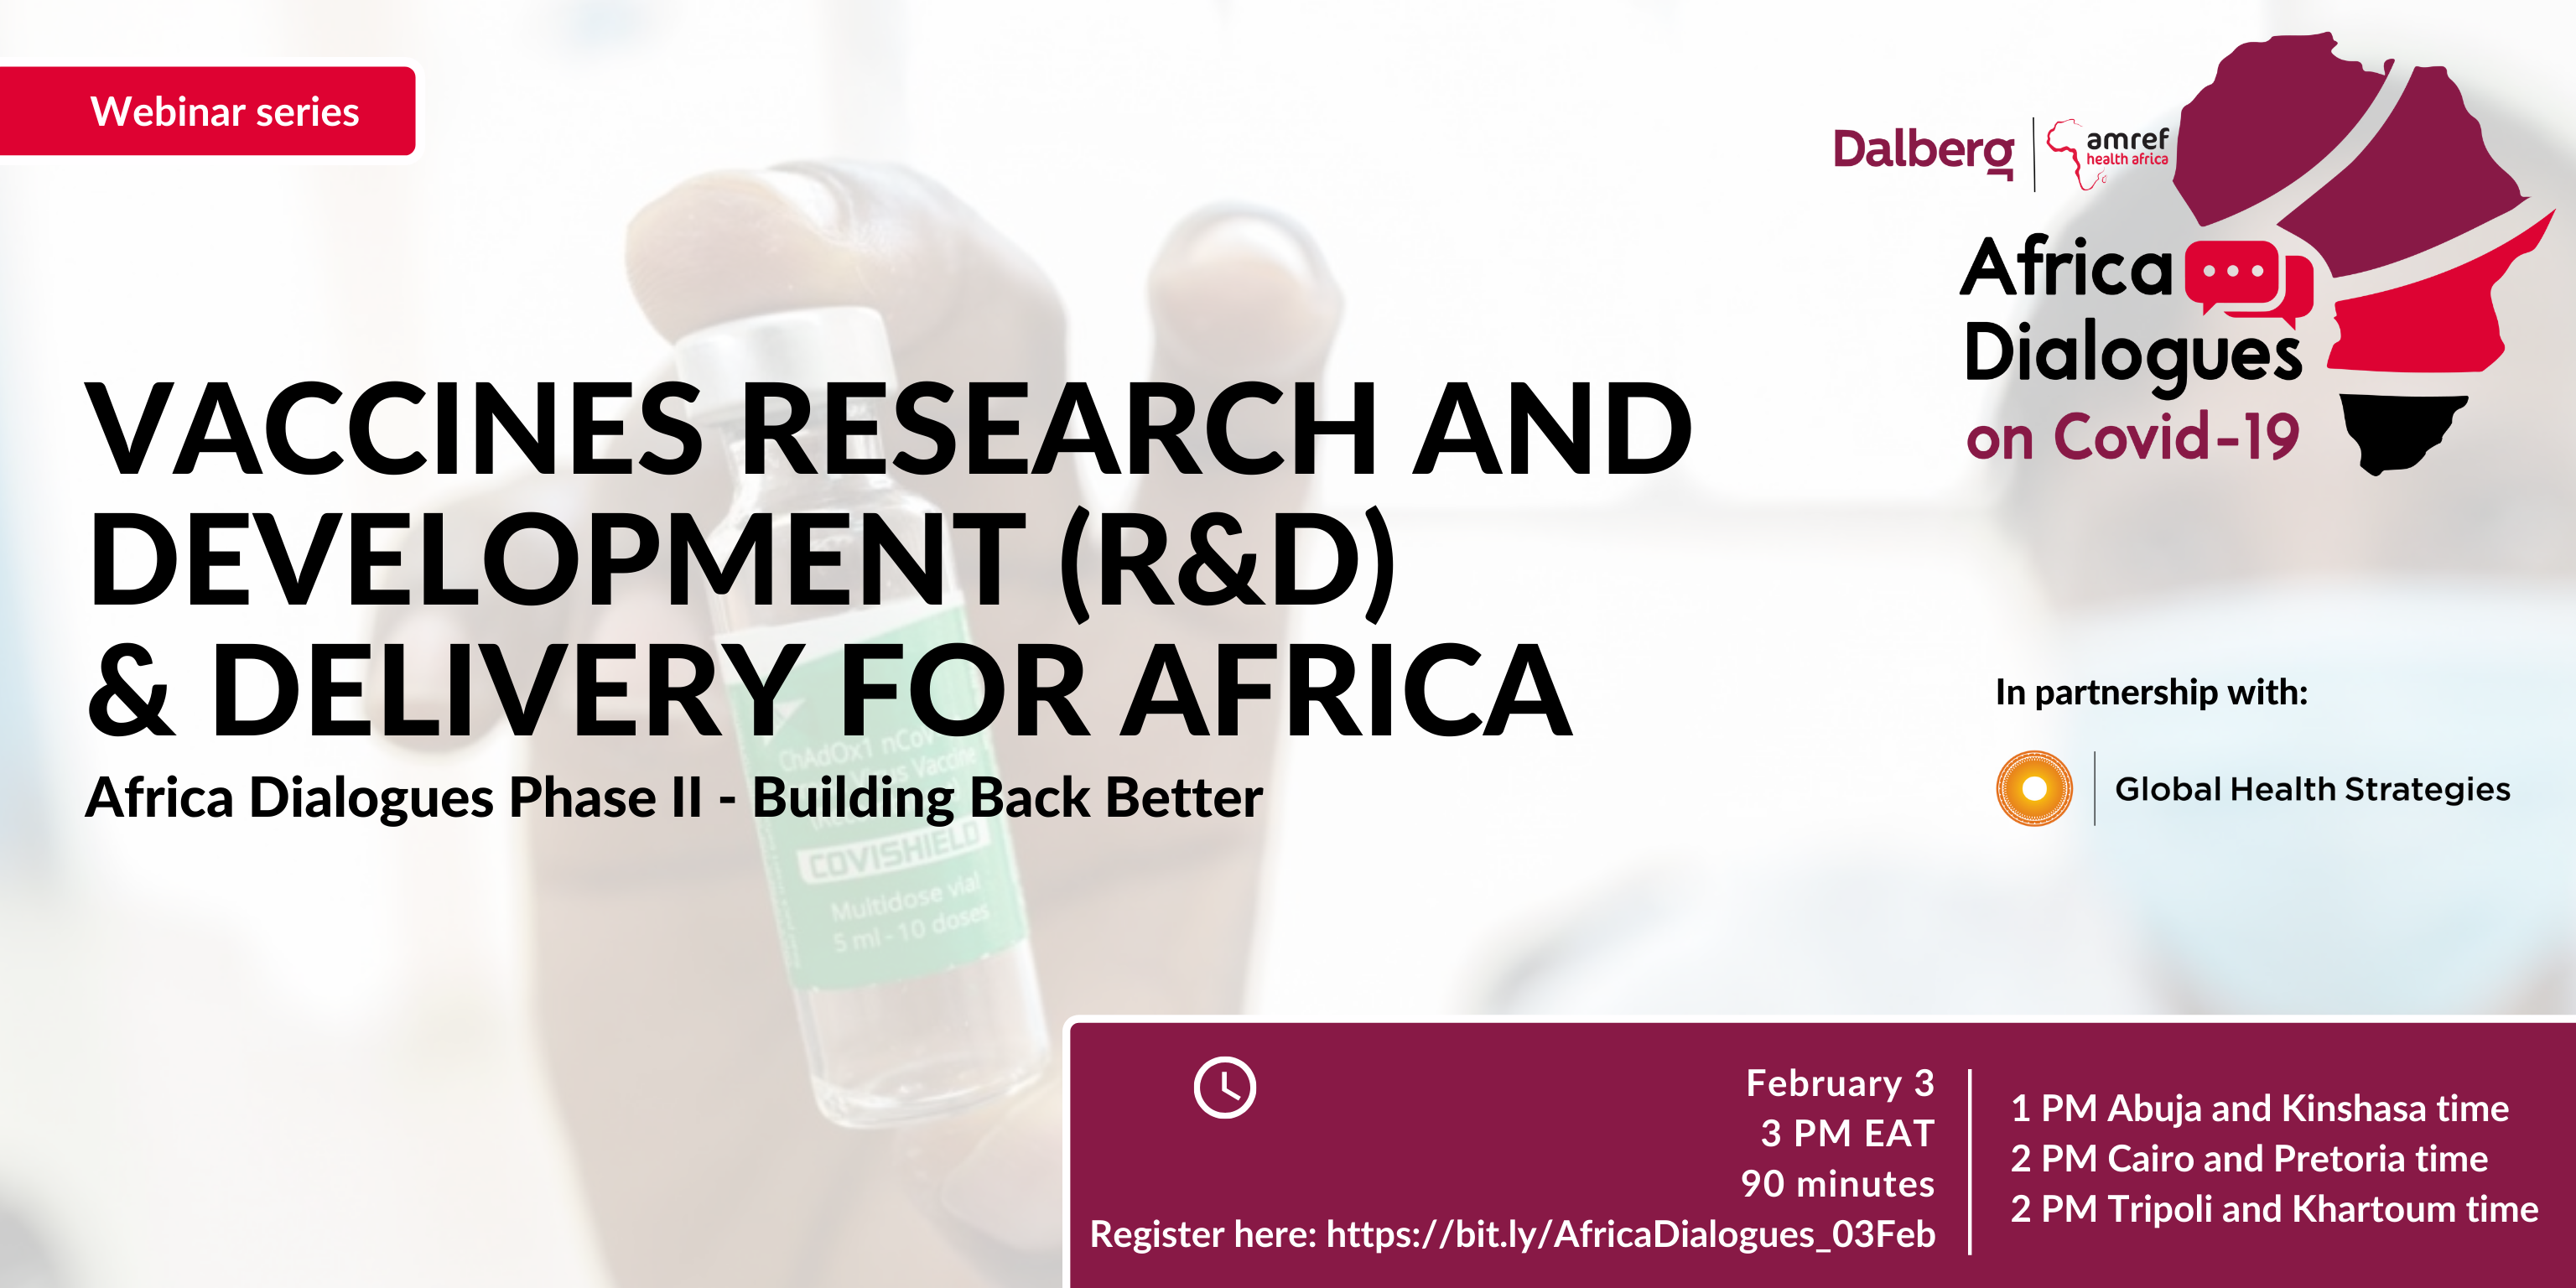 Vaccines Research and Development (R&D) and Delivery for Africa